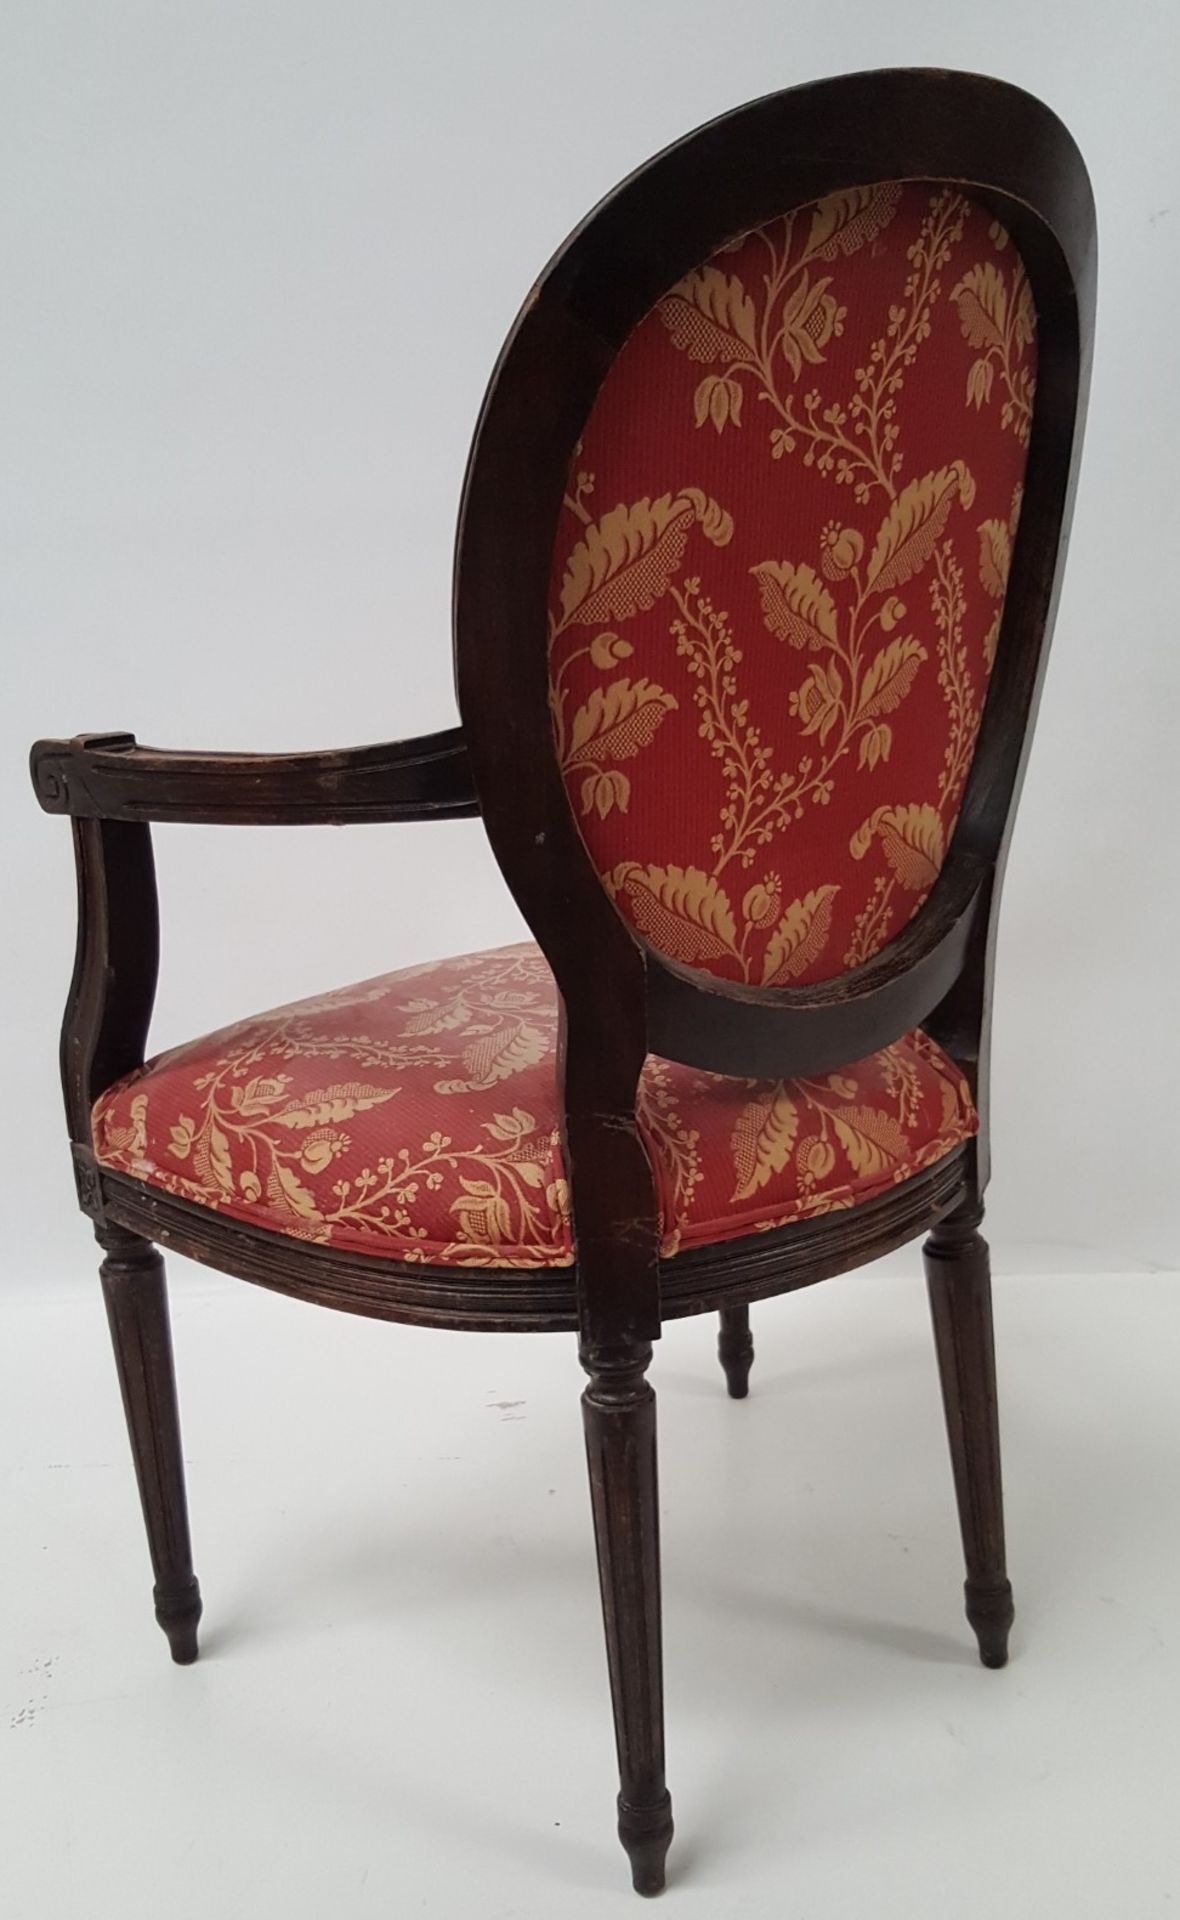 6 x Antique Style Wooden Chairs Upholstered In Red Fabric With Gold Leaf Design - CL431 - Image 7 of 8